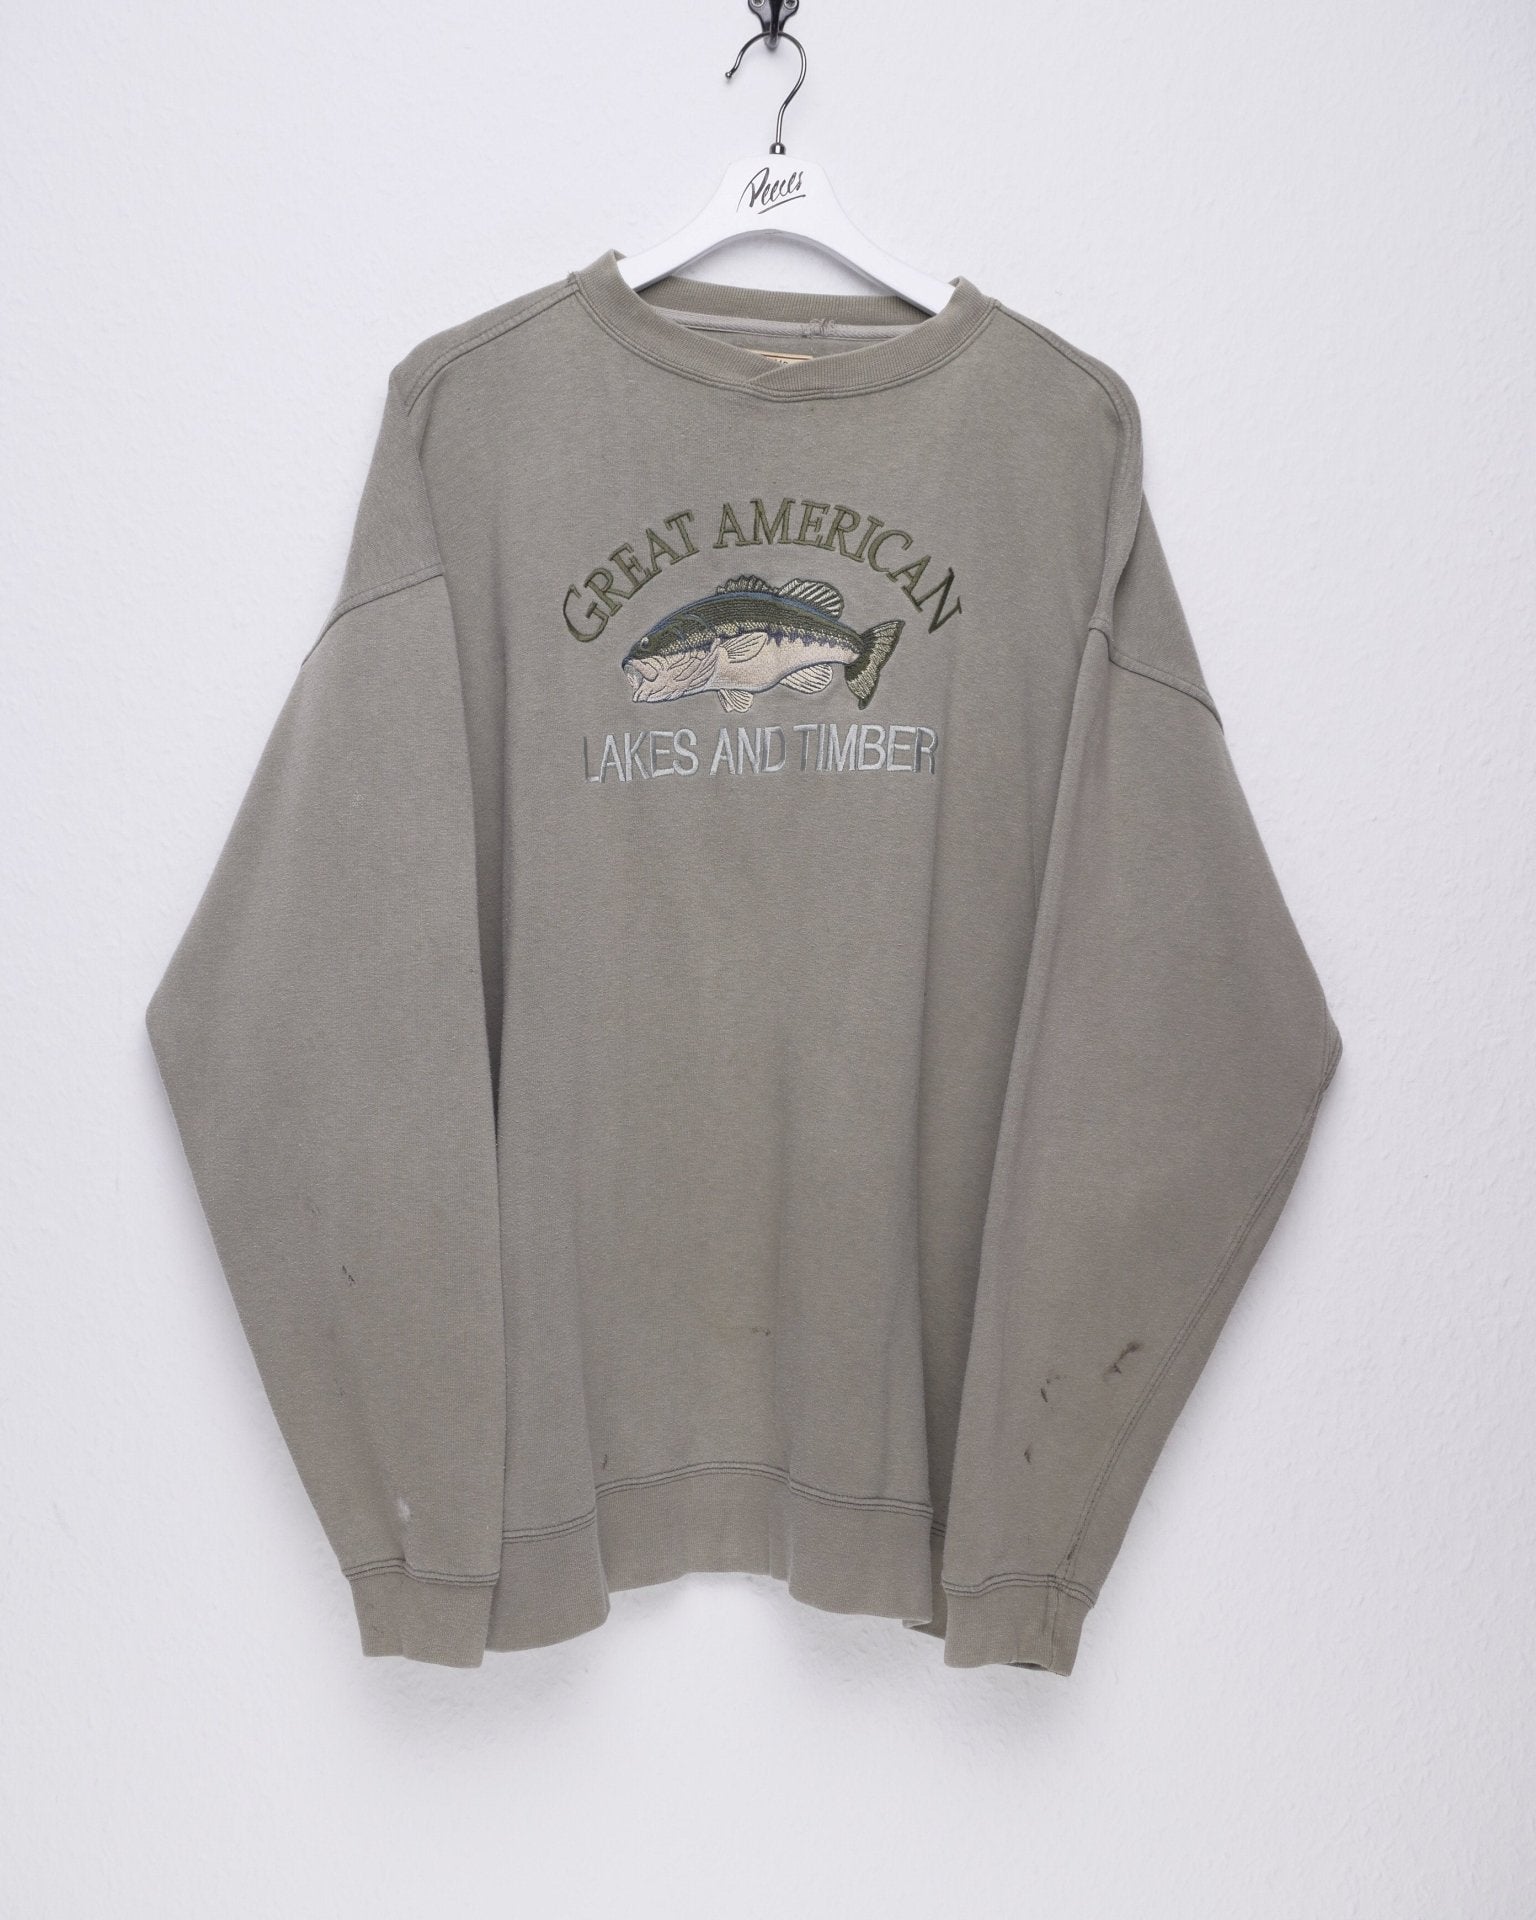 'Great American Lakes and Timber' embroidered Graphic beige Sweater - Peeces